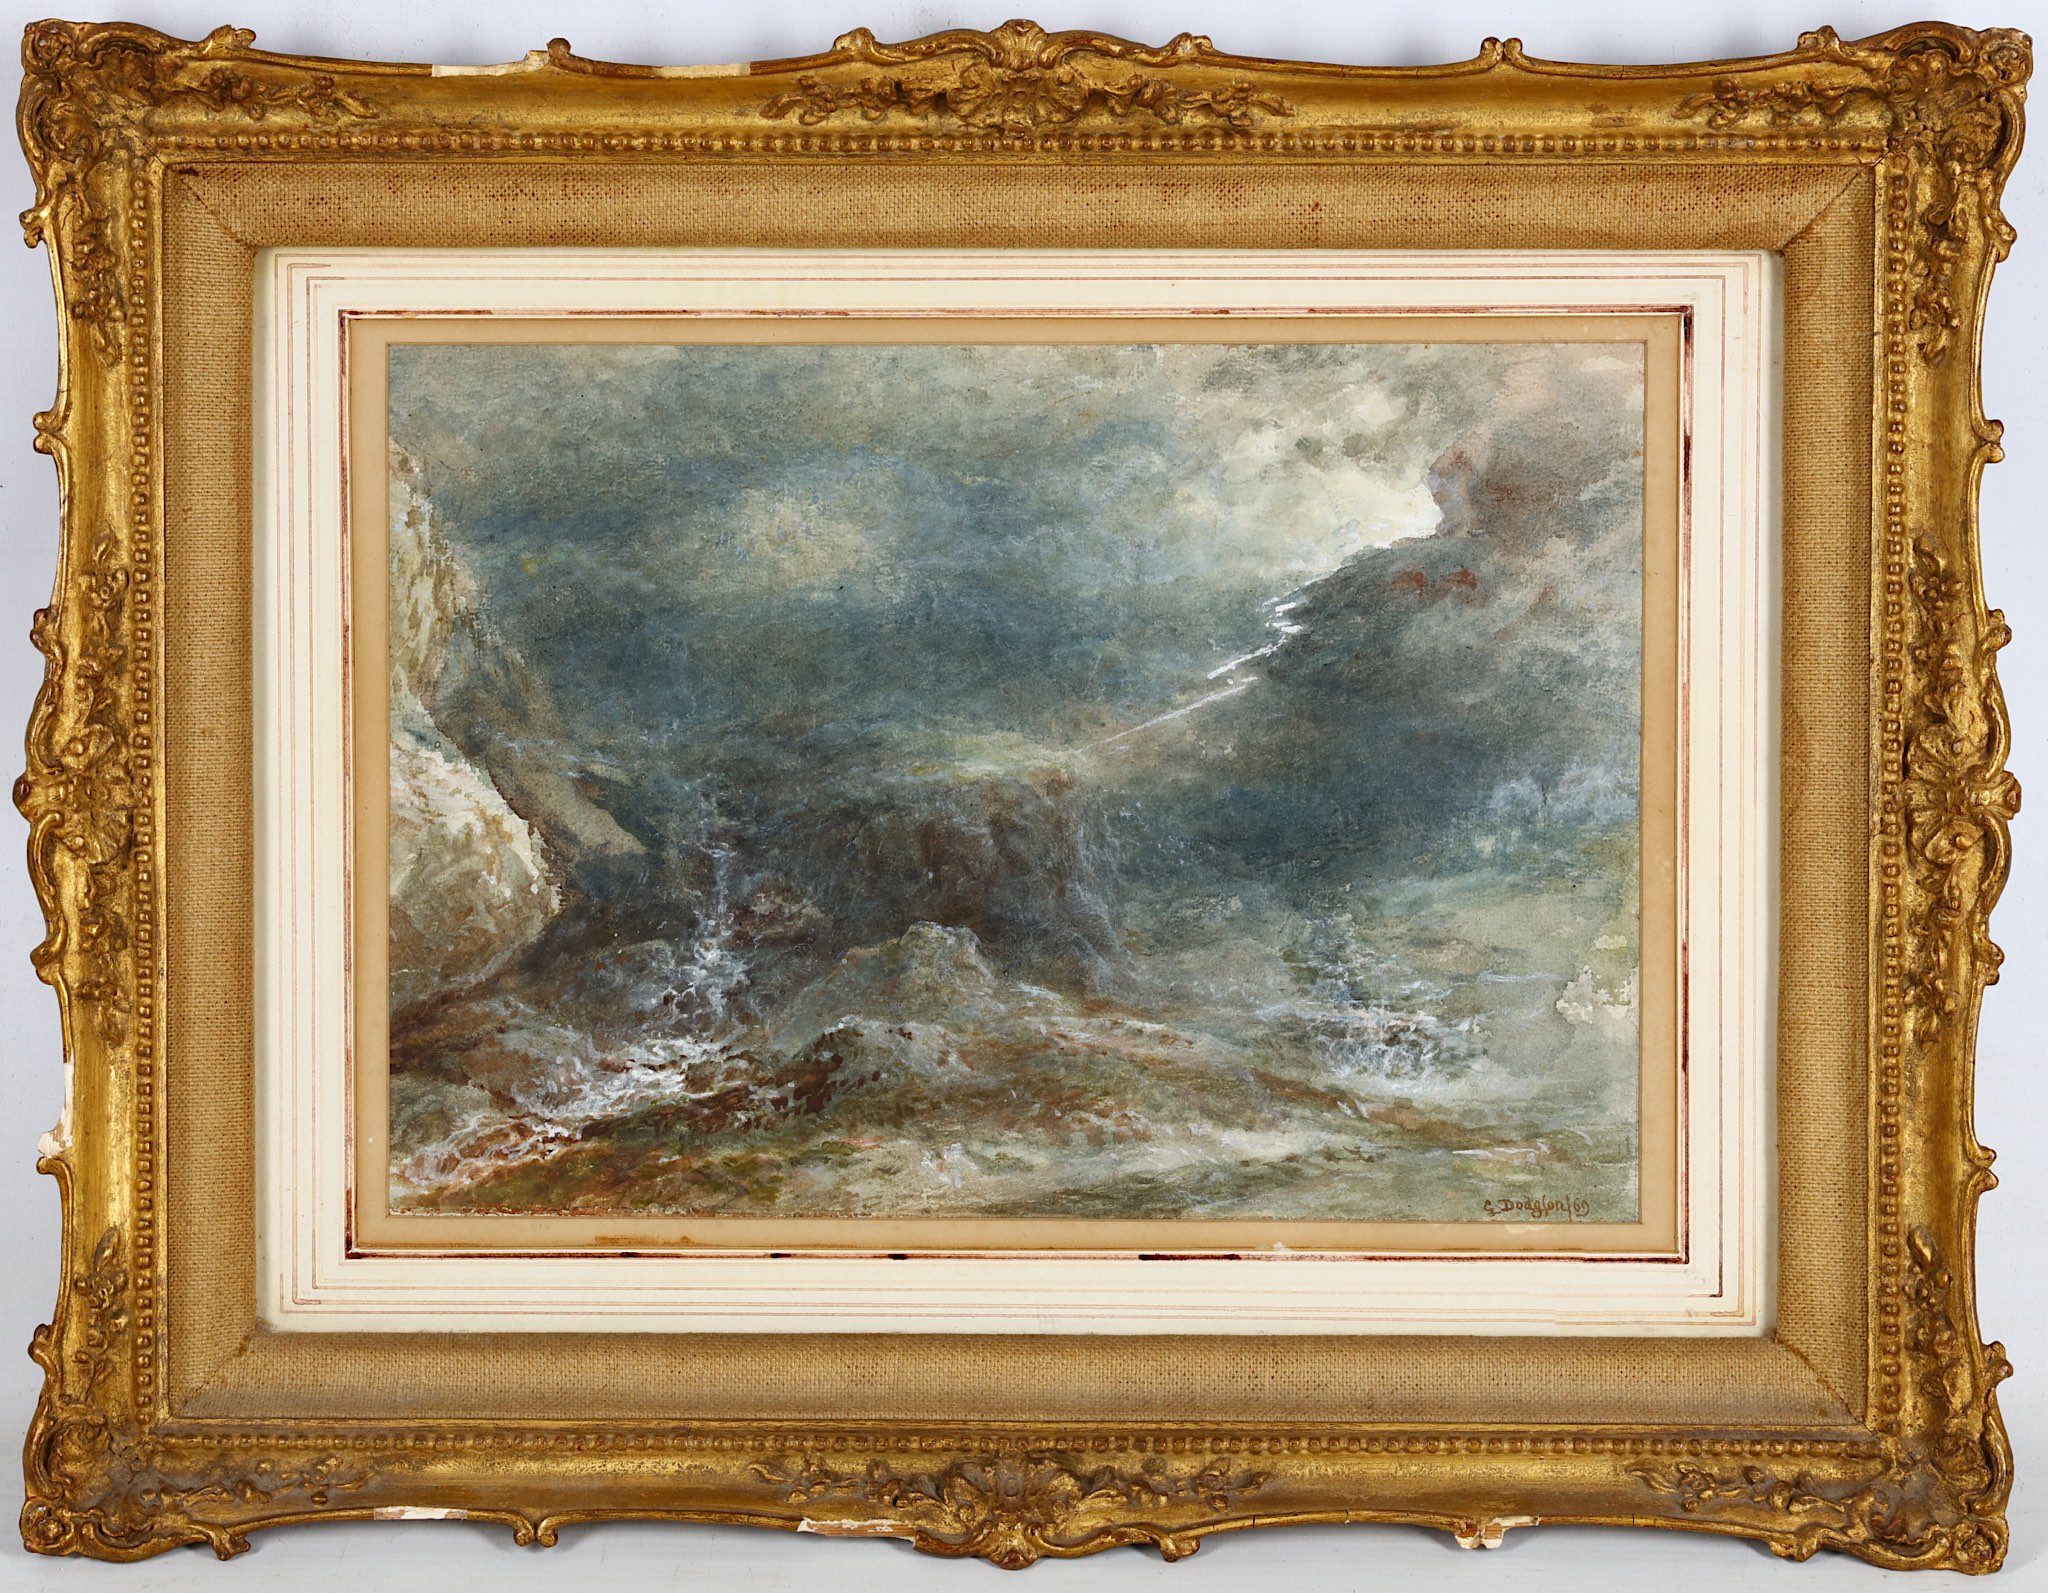 G. Dodgford 19th Century. 'A Storm in the Highlands'. Dramatic landscape watercolour with body